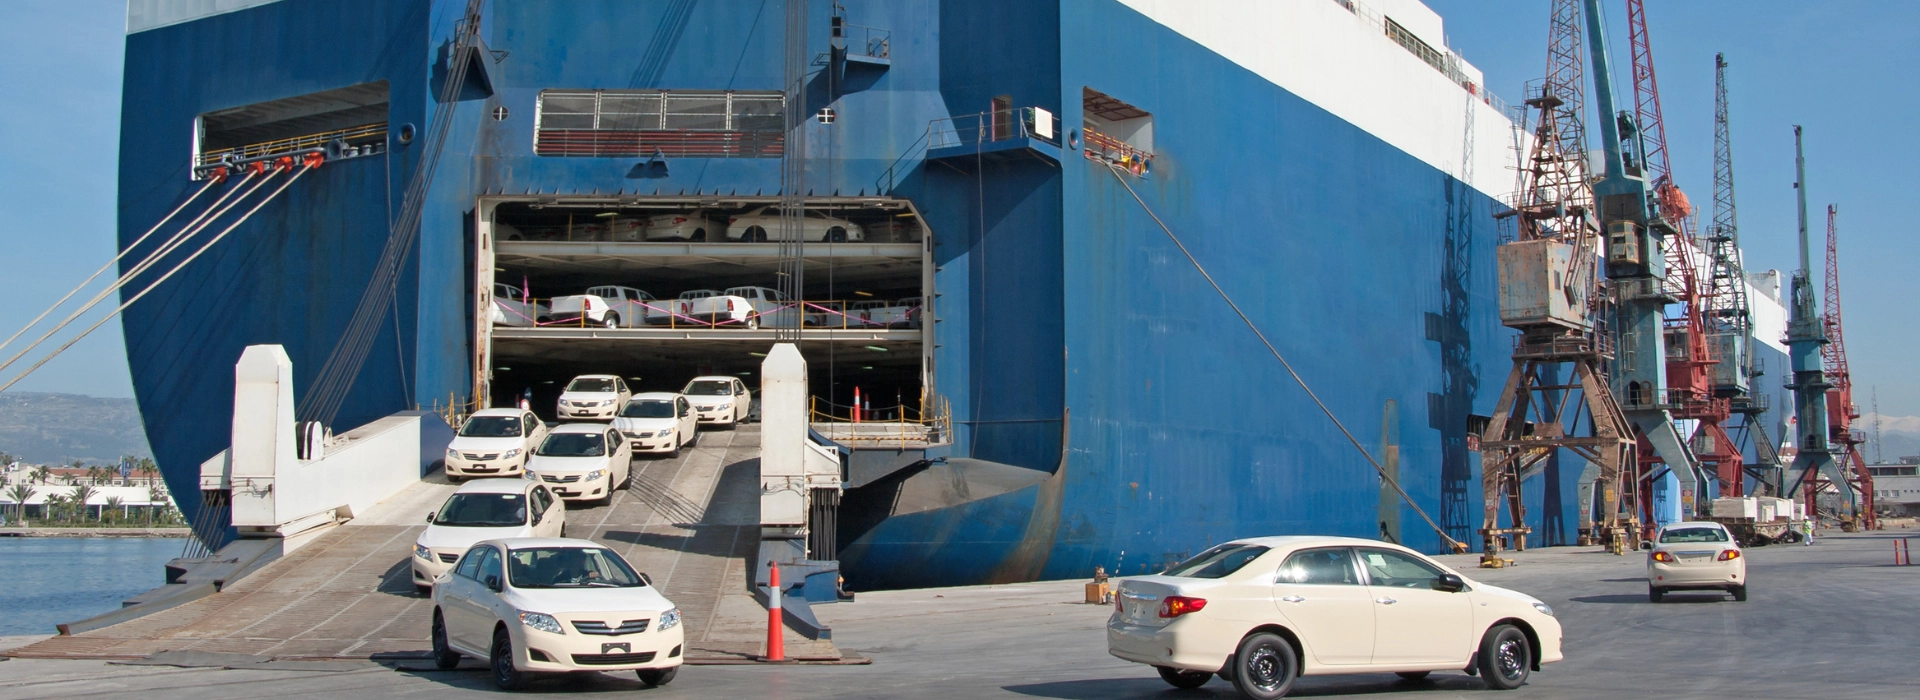 Roll-on/Roll-off (RoRo)